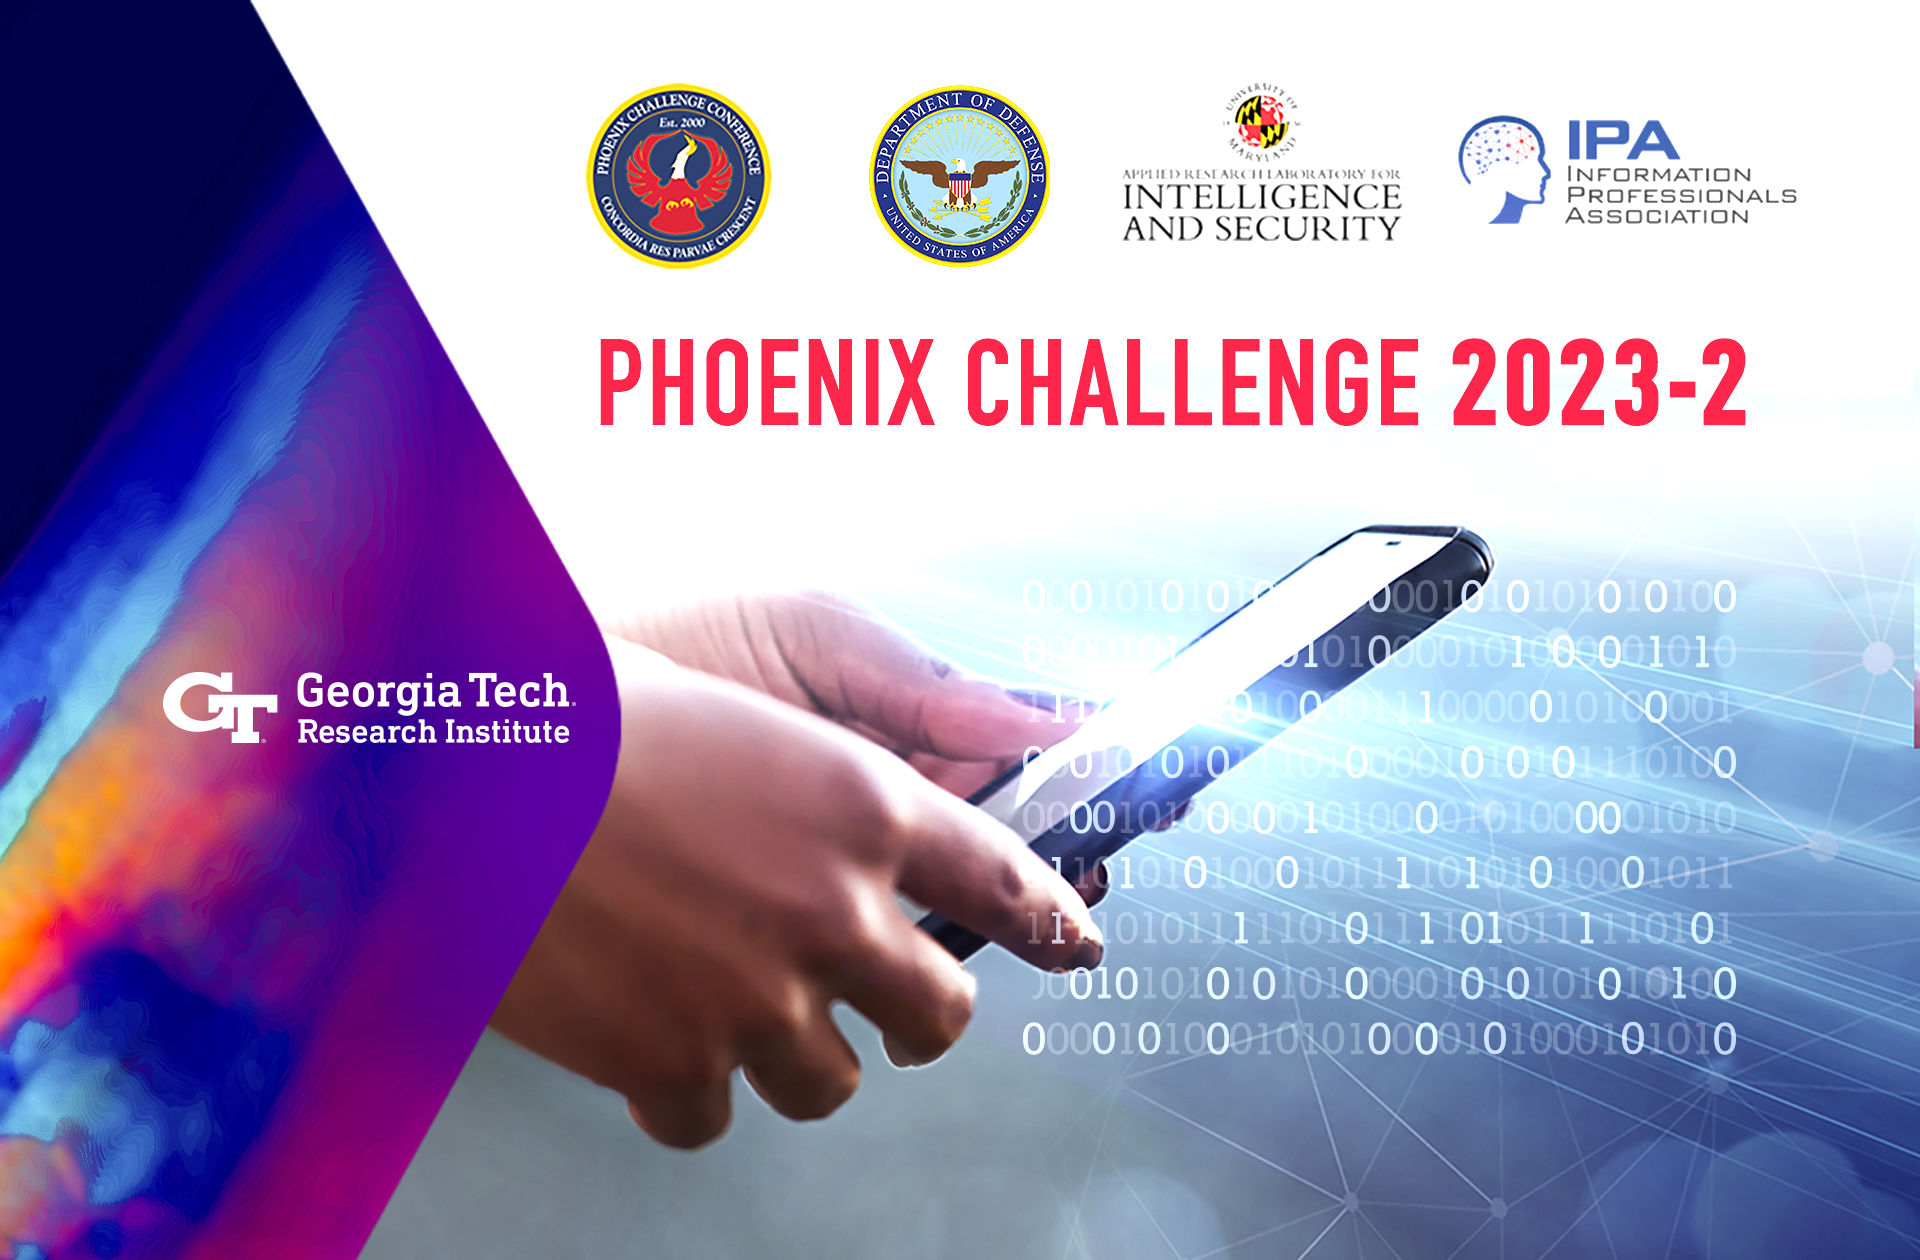 Phoenix Challenge will be hosted by Georgia Tech Research Institute in Atlanta.